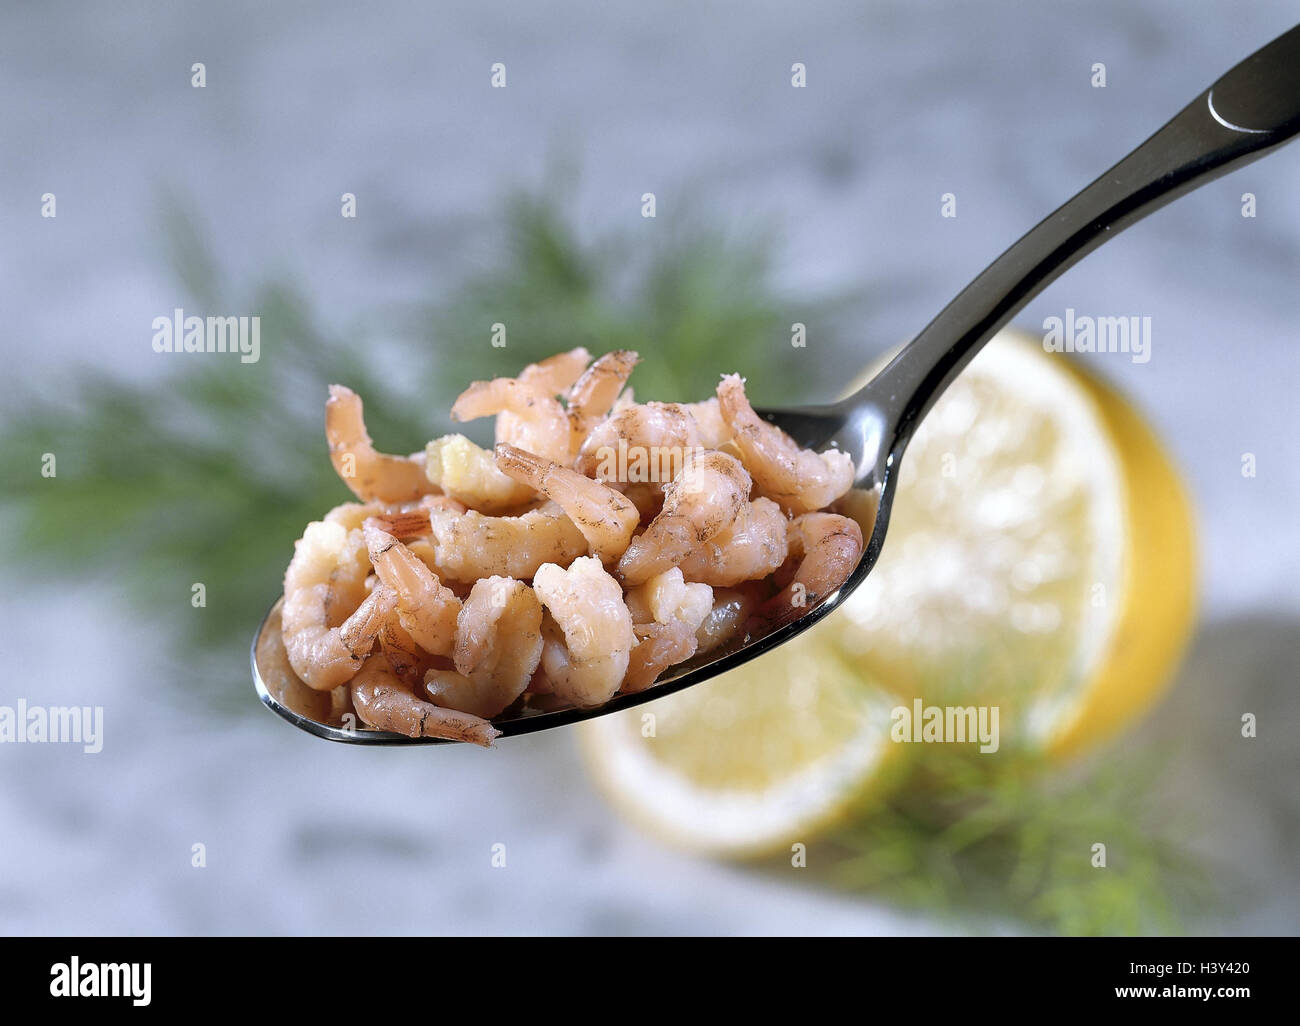 Spoon, North Sea crabs, dill, lemons, fish dish, crabs, shrimps, dish, food, meal, sea animals, crustaceans, shellfish, food, eat, delicatessen, delicacy, speciality, product photography, Still life Stock Photo